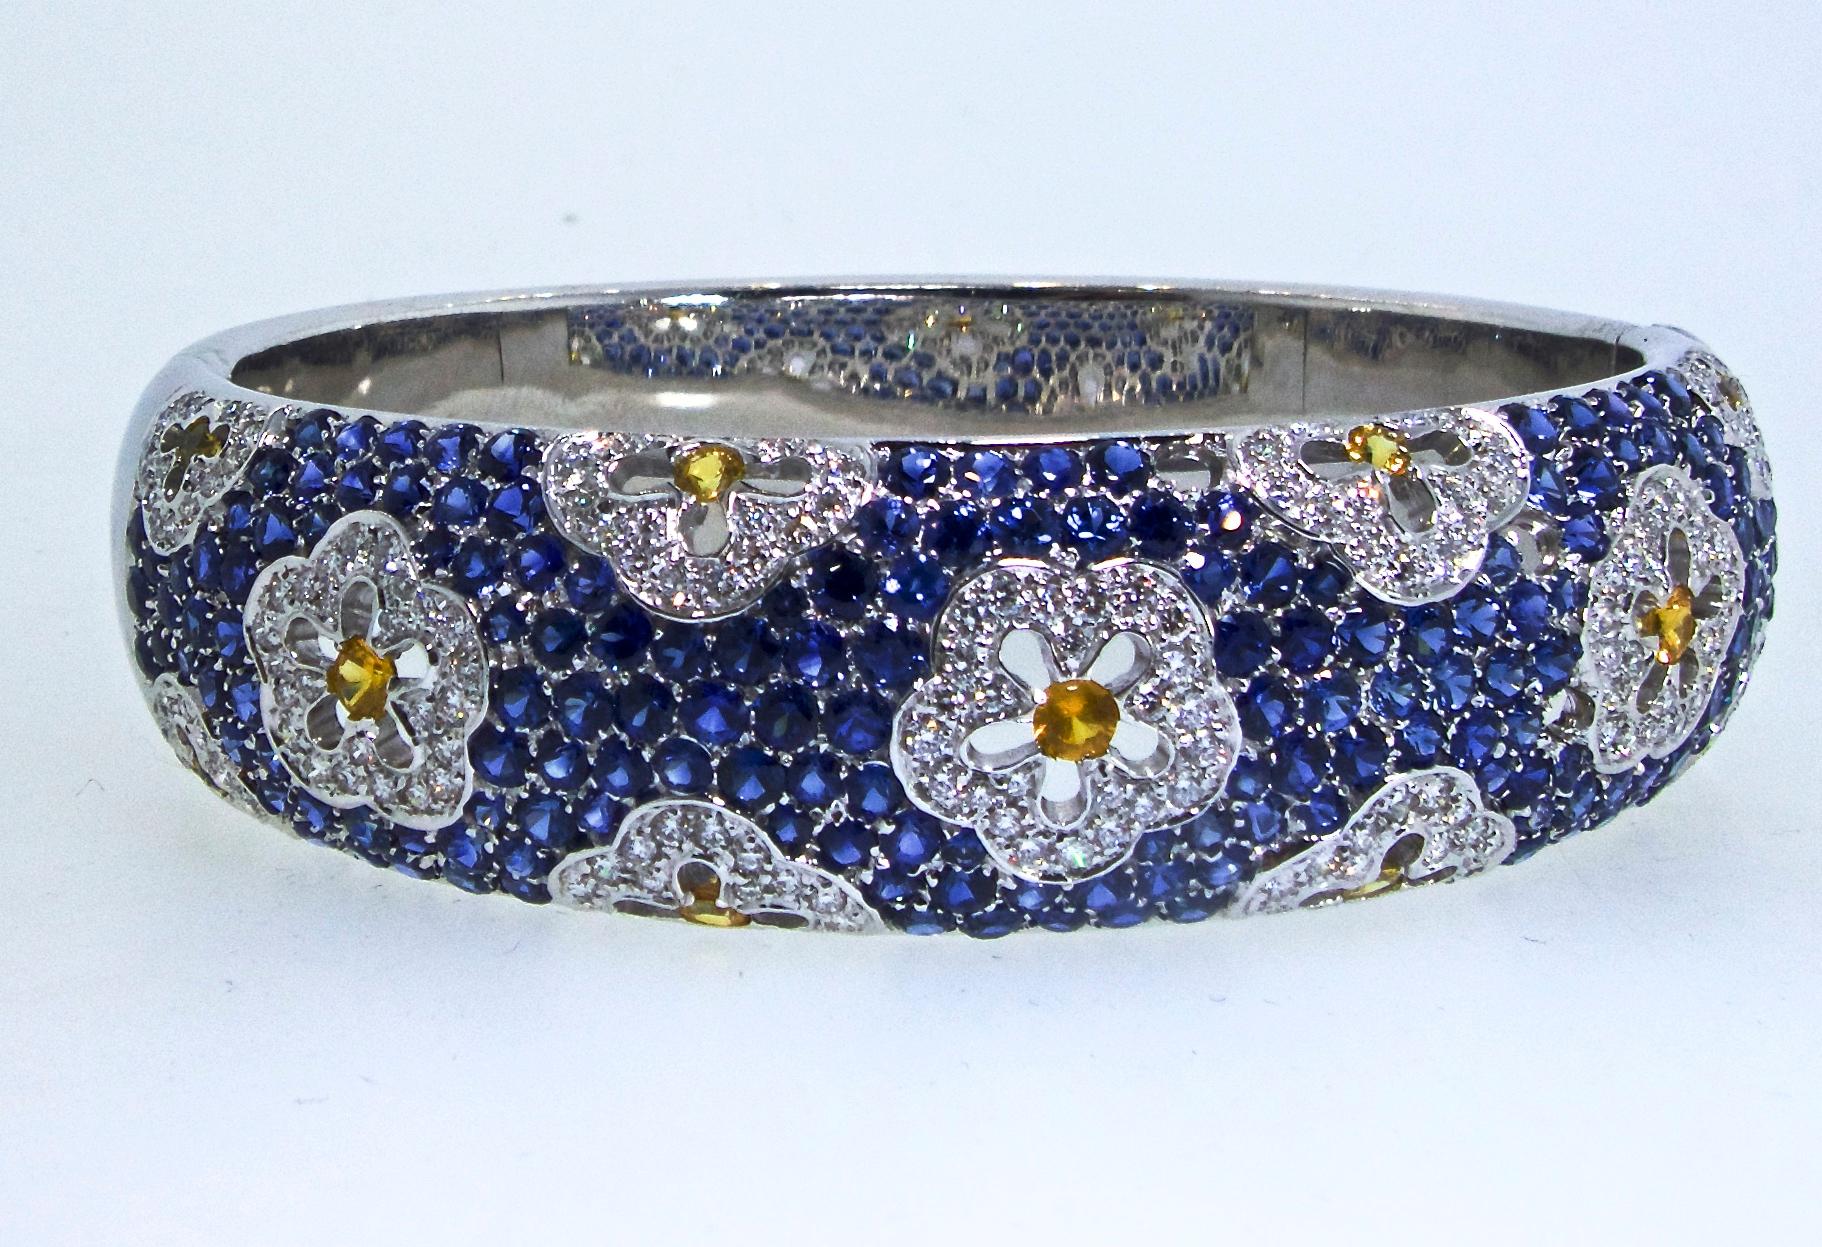 Sapphire and Diamond bracelet with floral motifs on a bed of blue sapphires.  This large 18K white gold bangle bracelet has sturdy, well made, clasp.  It is 7 inches in diameter.  The natural blue sapphires are bright and vivid, the natural yellow